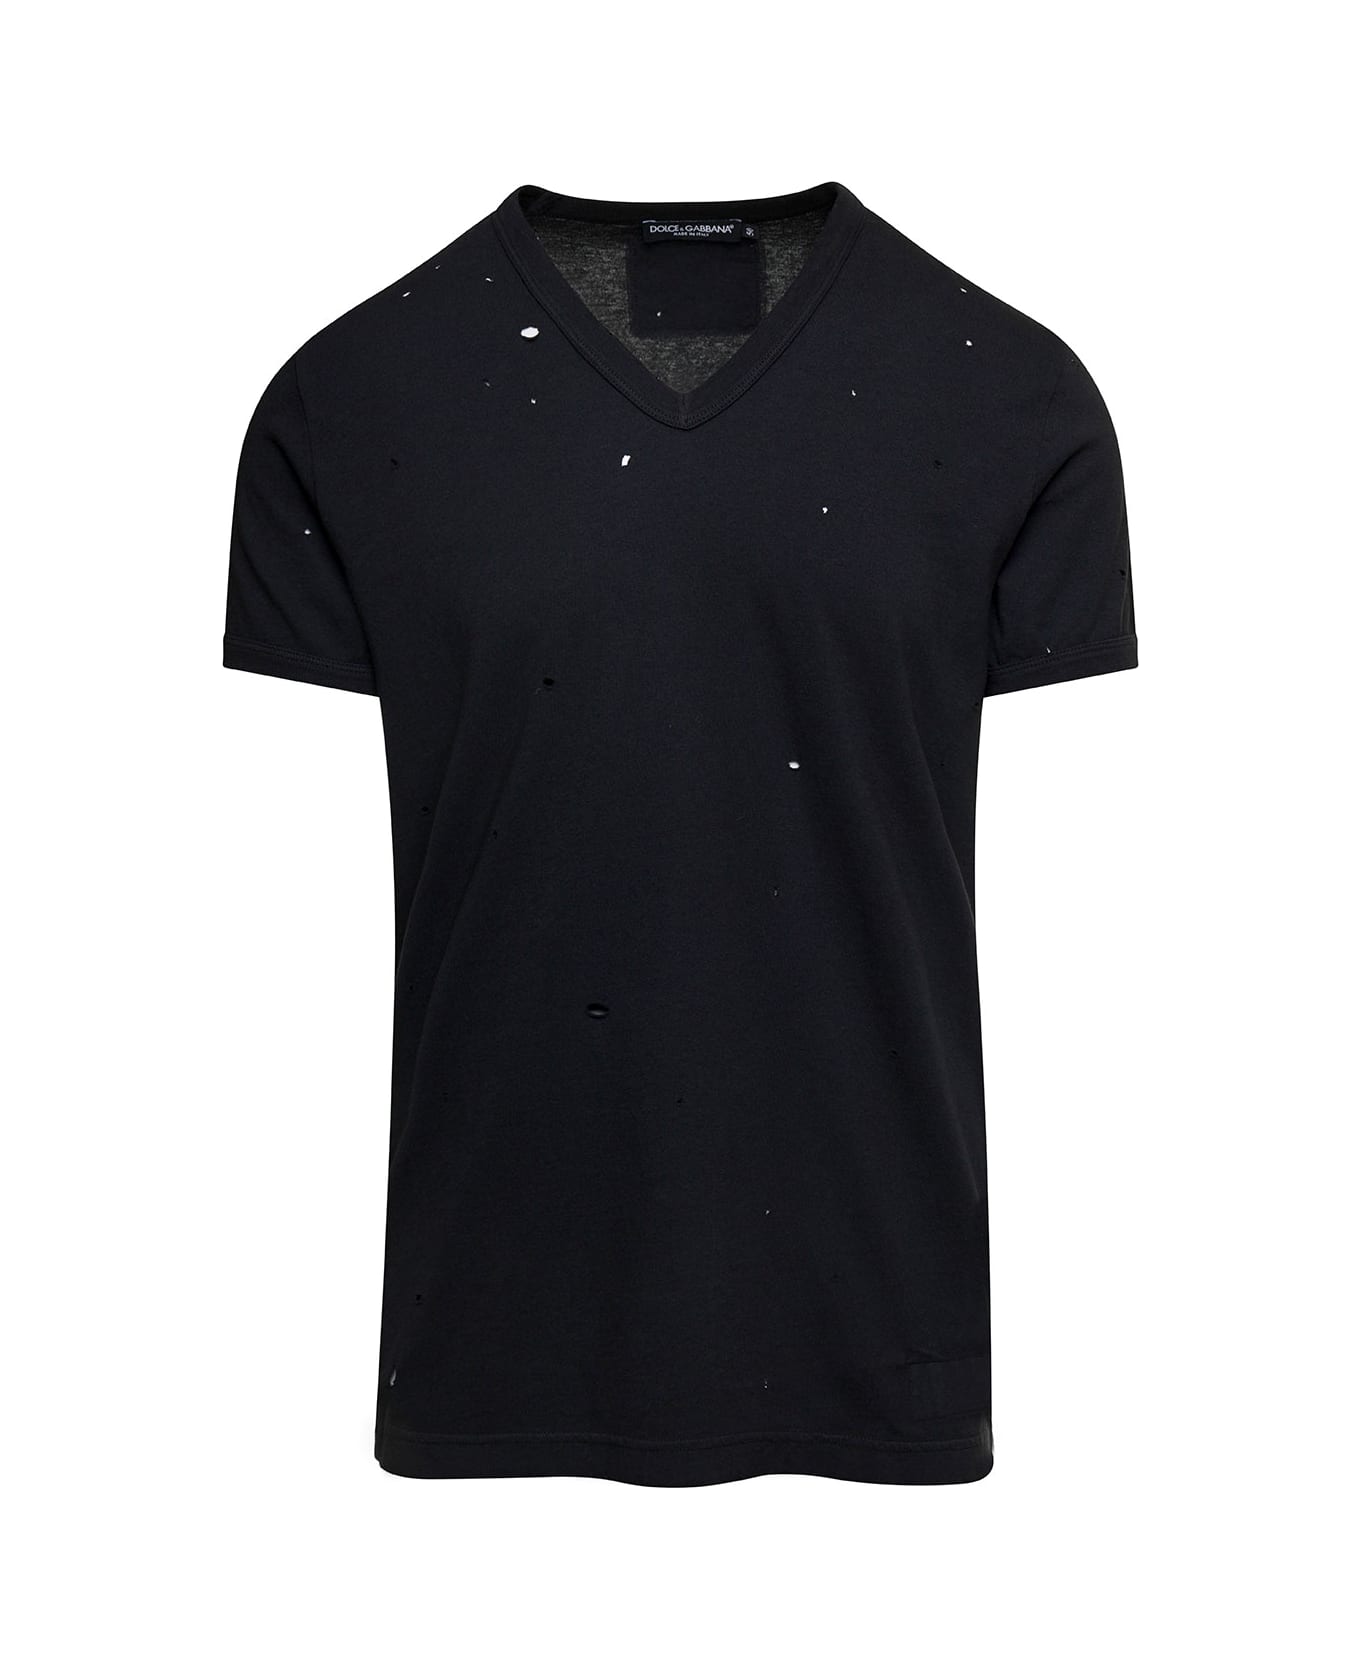 Dolce & Gabbana Black T-shirt With All-over Rips And Ri-edition Logo Patch In Cotton Man - Black